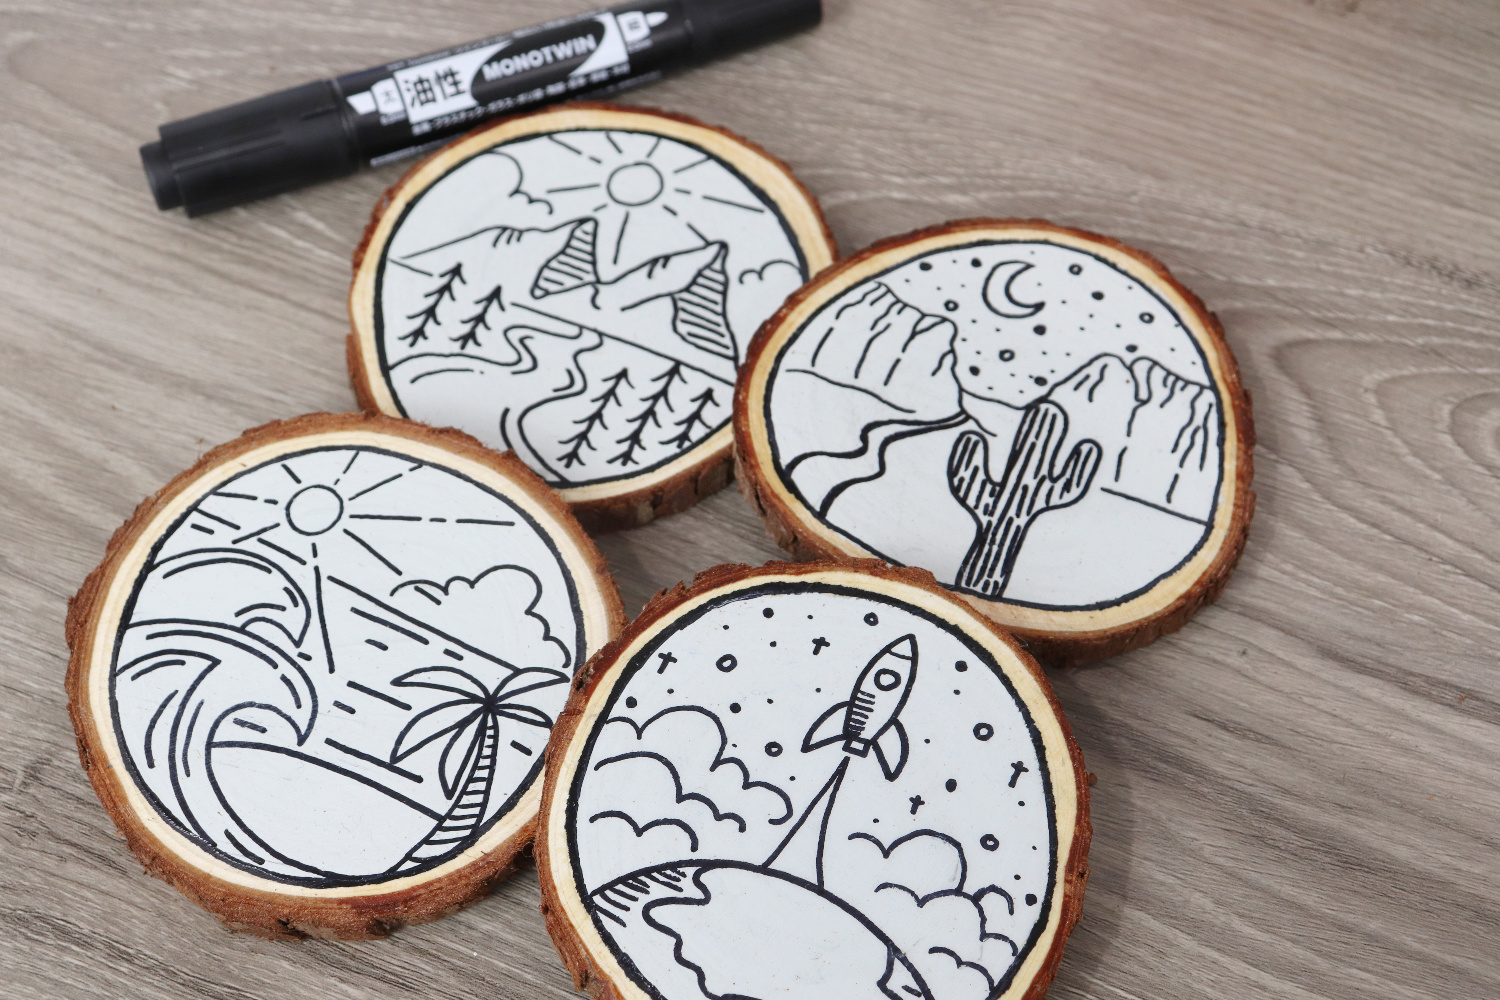 Image contains four monoline travel coasters: one is beach themed, one mountain themed, one desert themed, and one space themed, on a white background. A MONOTwin marker sits nearby on a wooden desktop.